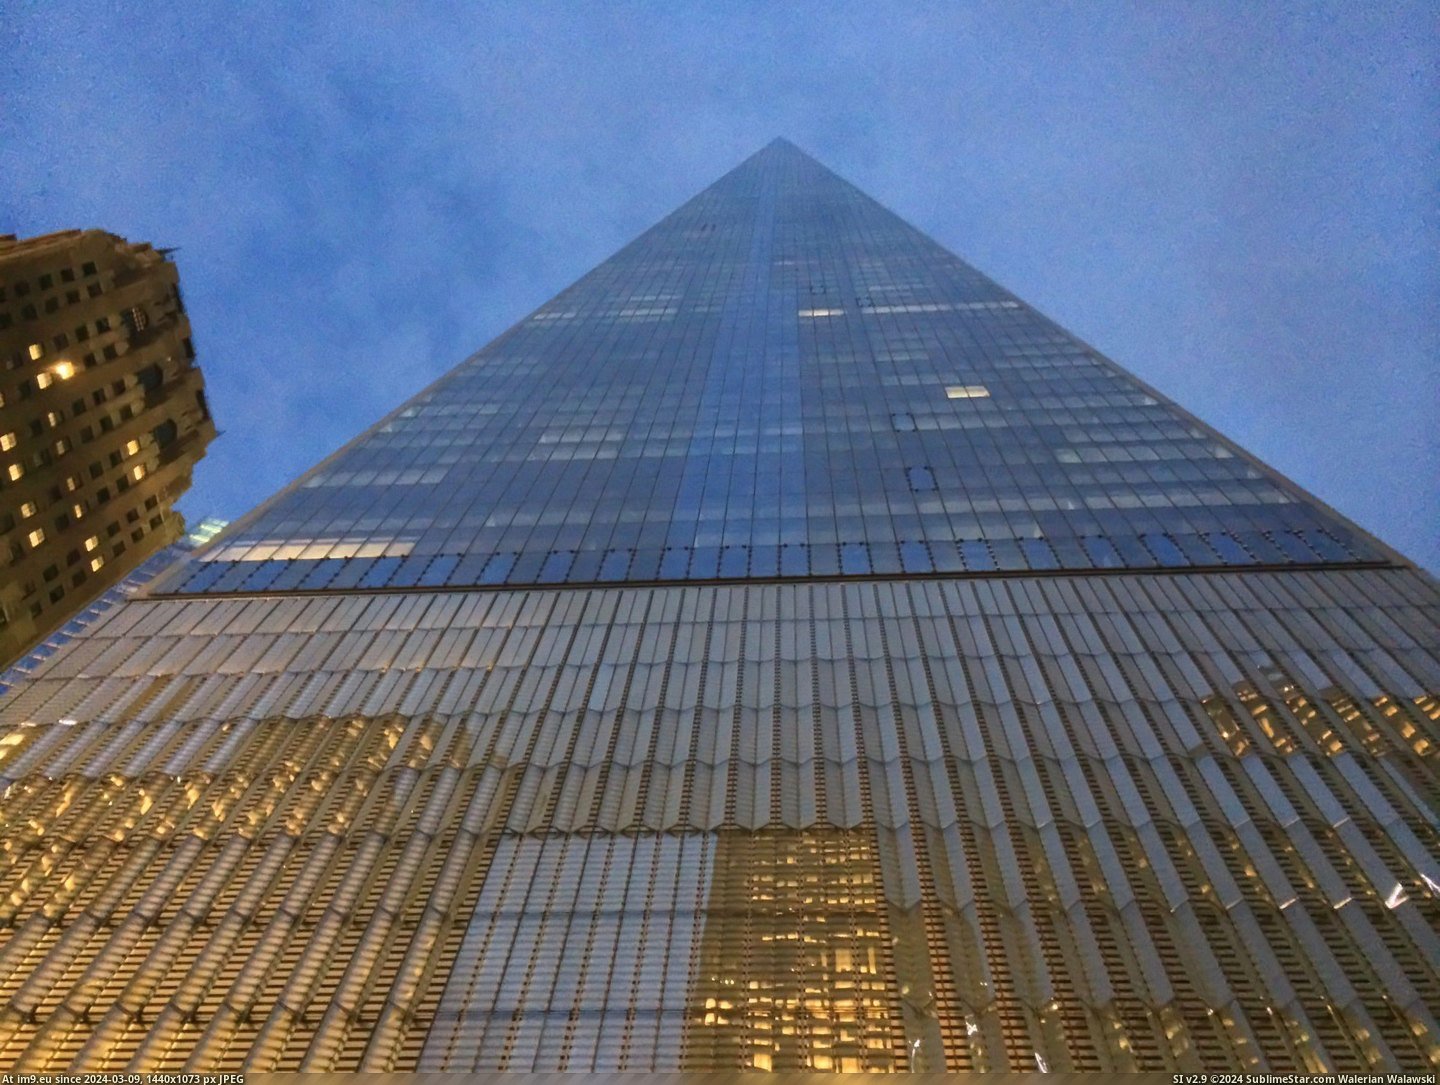 #One #World #Center #Freedom #Trade #Nyc #Tower [Mildlyinteresting] The new One World Trade Center (Freedom Tower) in NYC looks like it goes on forever when you're next to it Pic. (Bild von album My r/MILDLYINTERESTING favs))